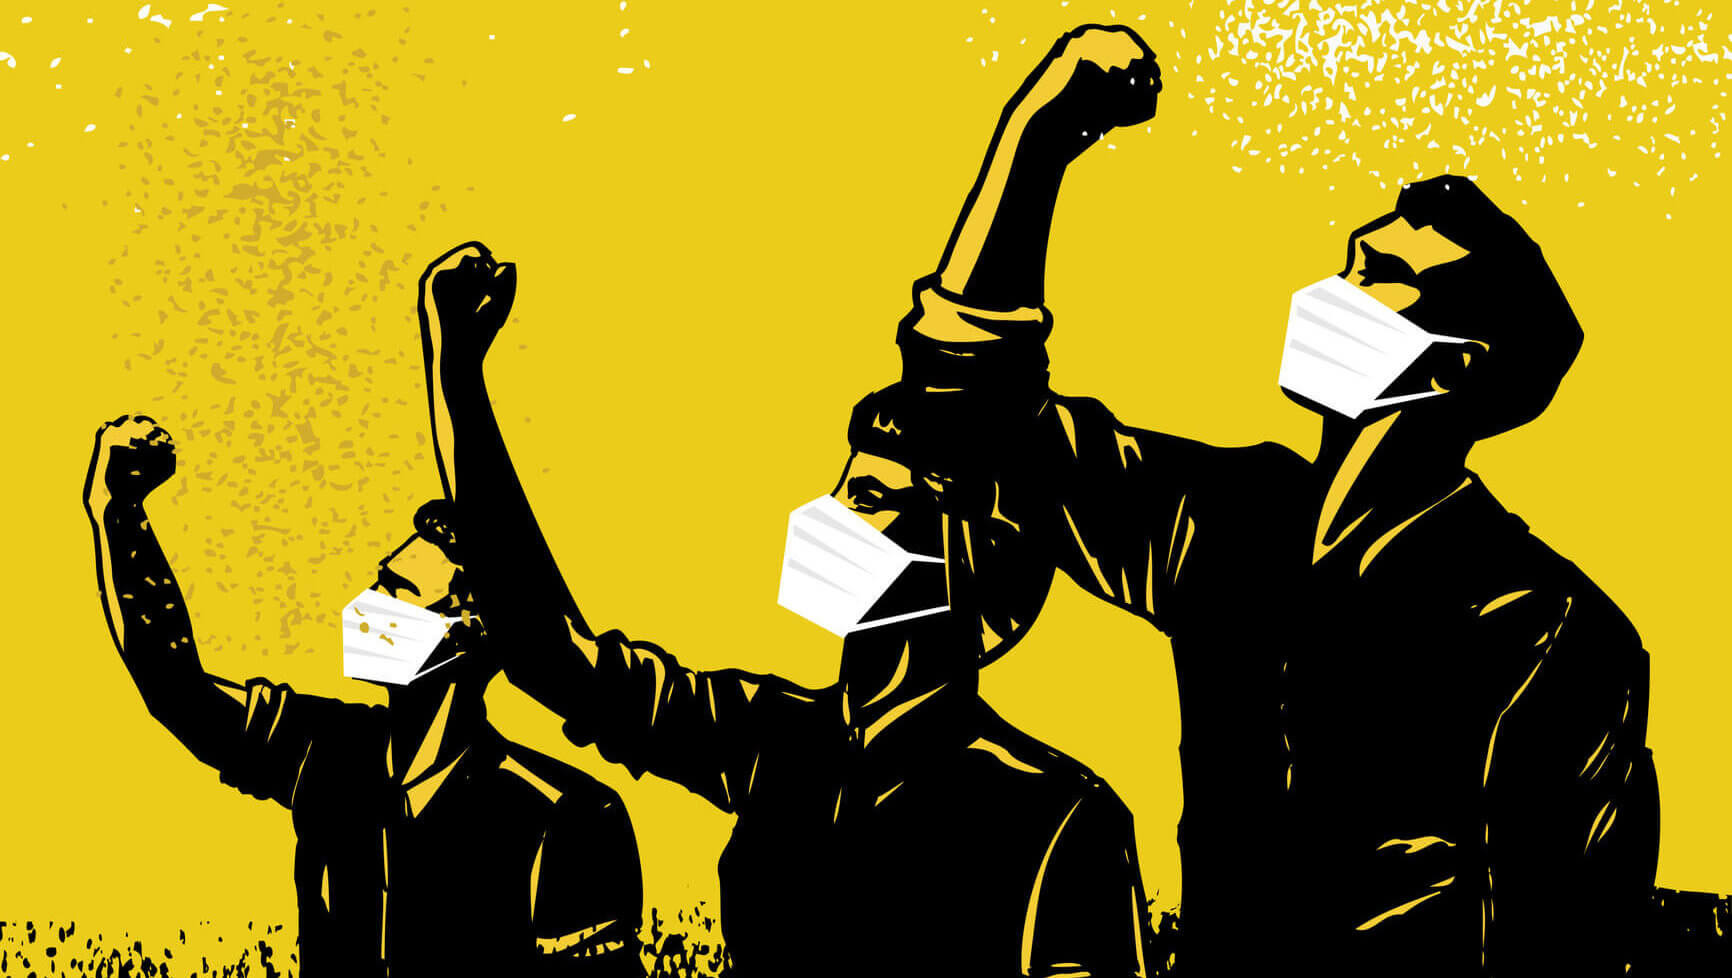 Illustration of three people with their fist raised up in the hair wearing masks with a slogan saying "Together We Will Win"